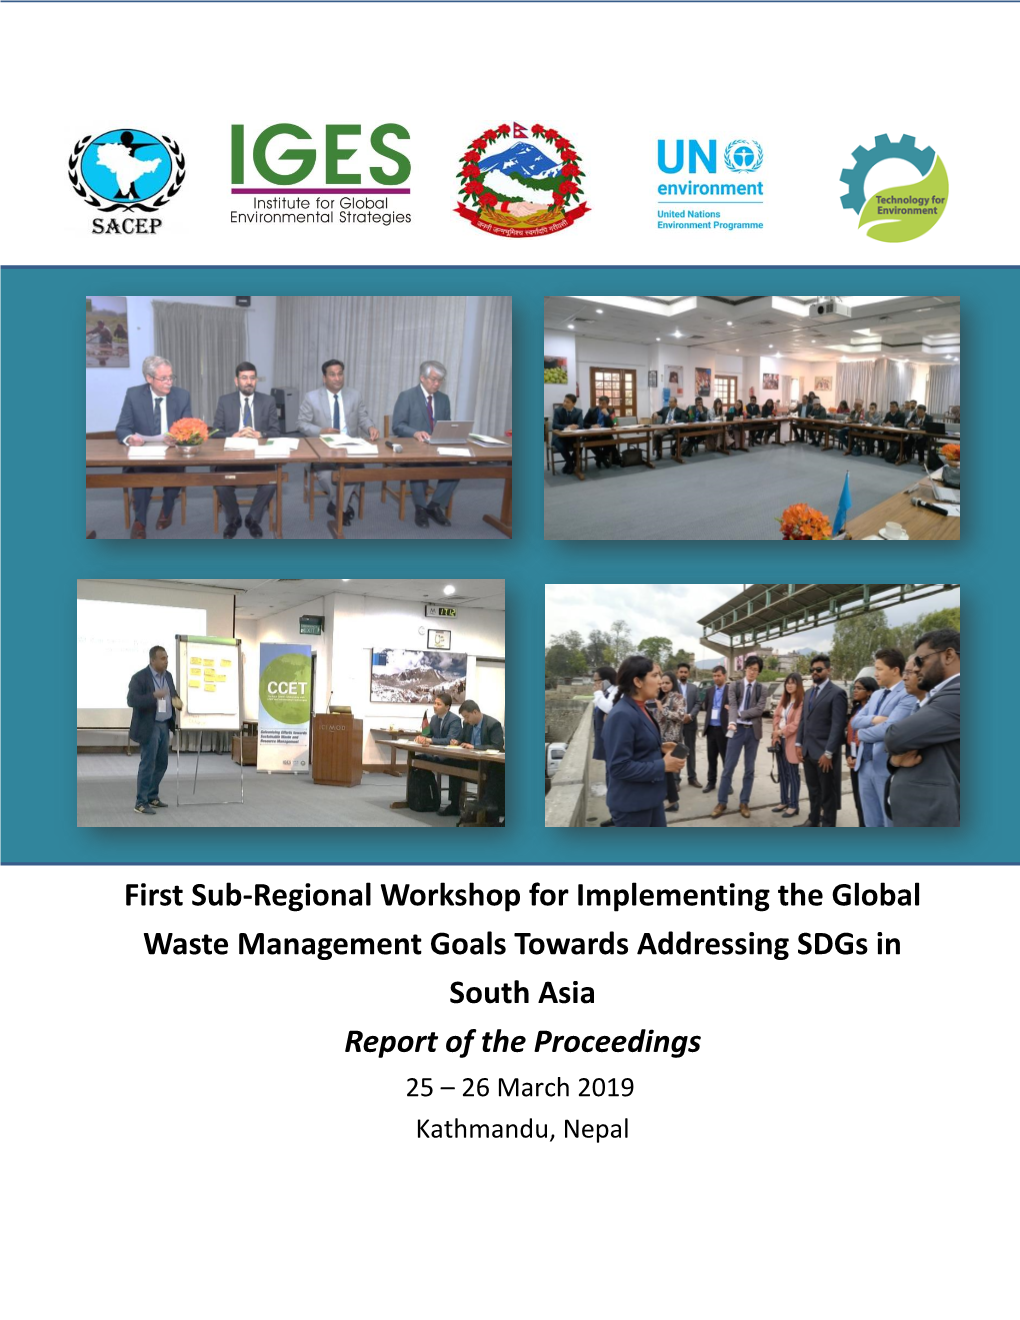 First Sub-Regional Workshop for Implementing the Global Waste